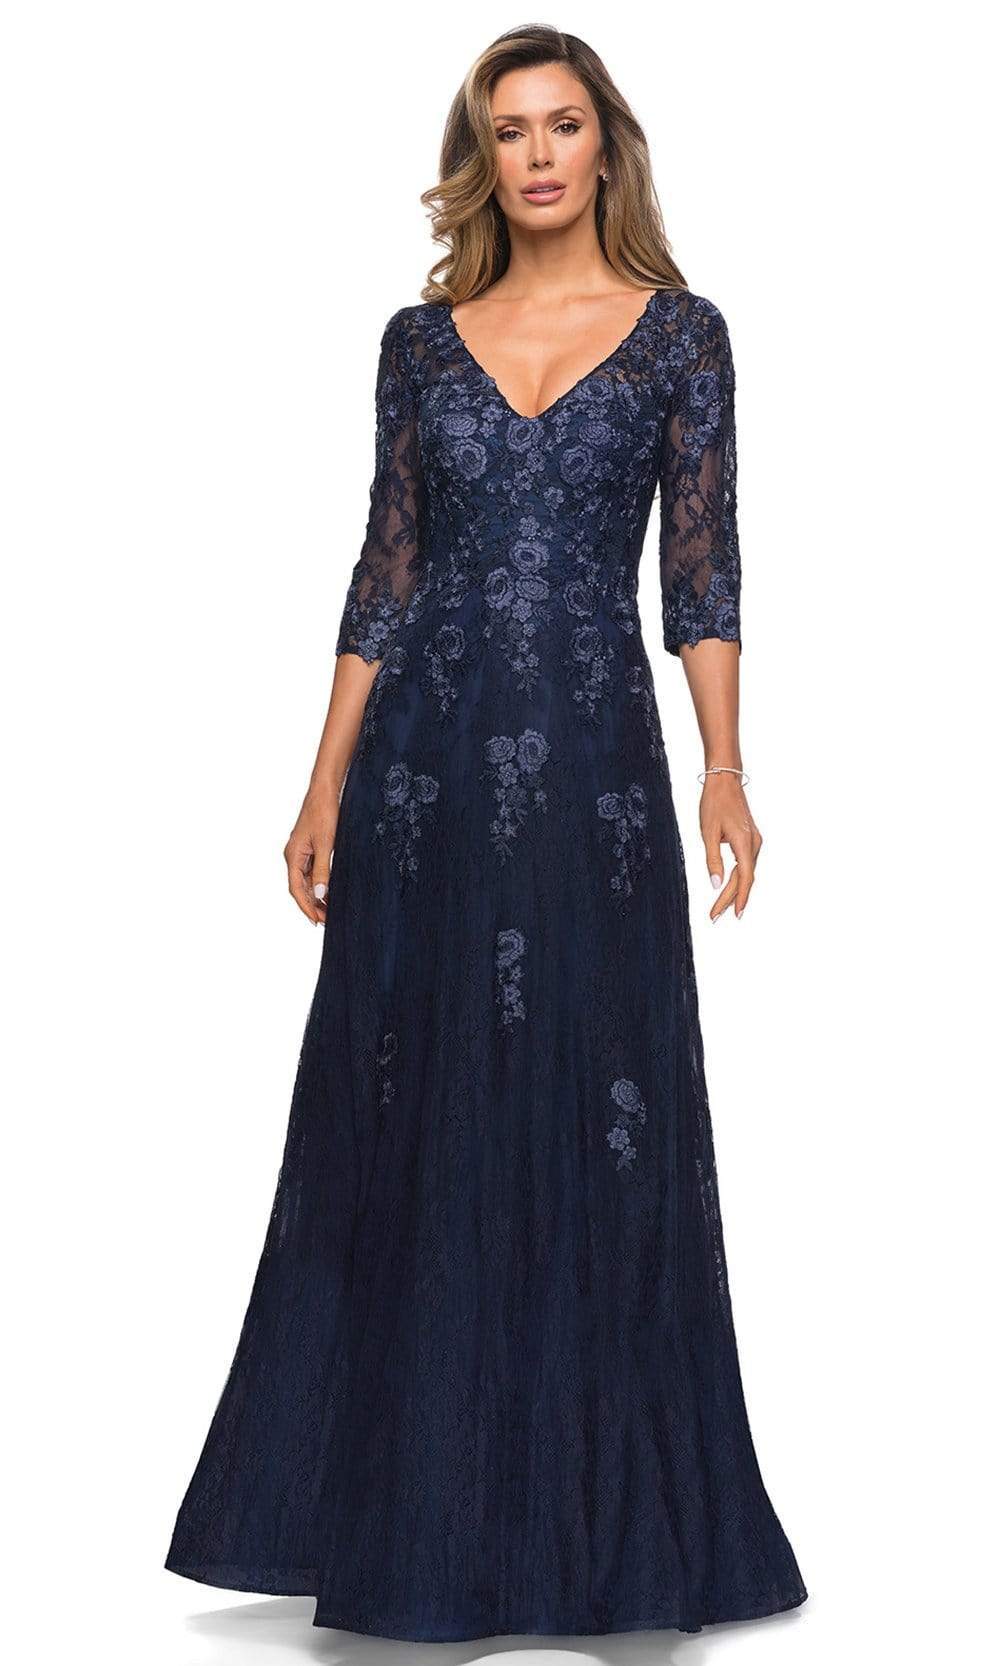 Image of La Femme - 28000 Floral Lace Long Mother of the Bride Gown